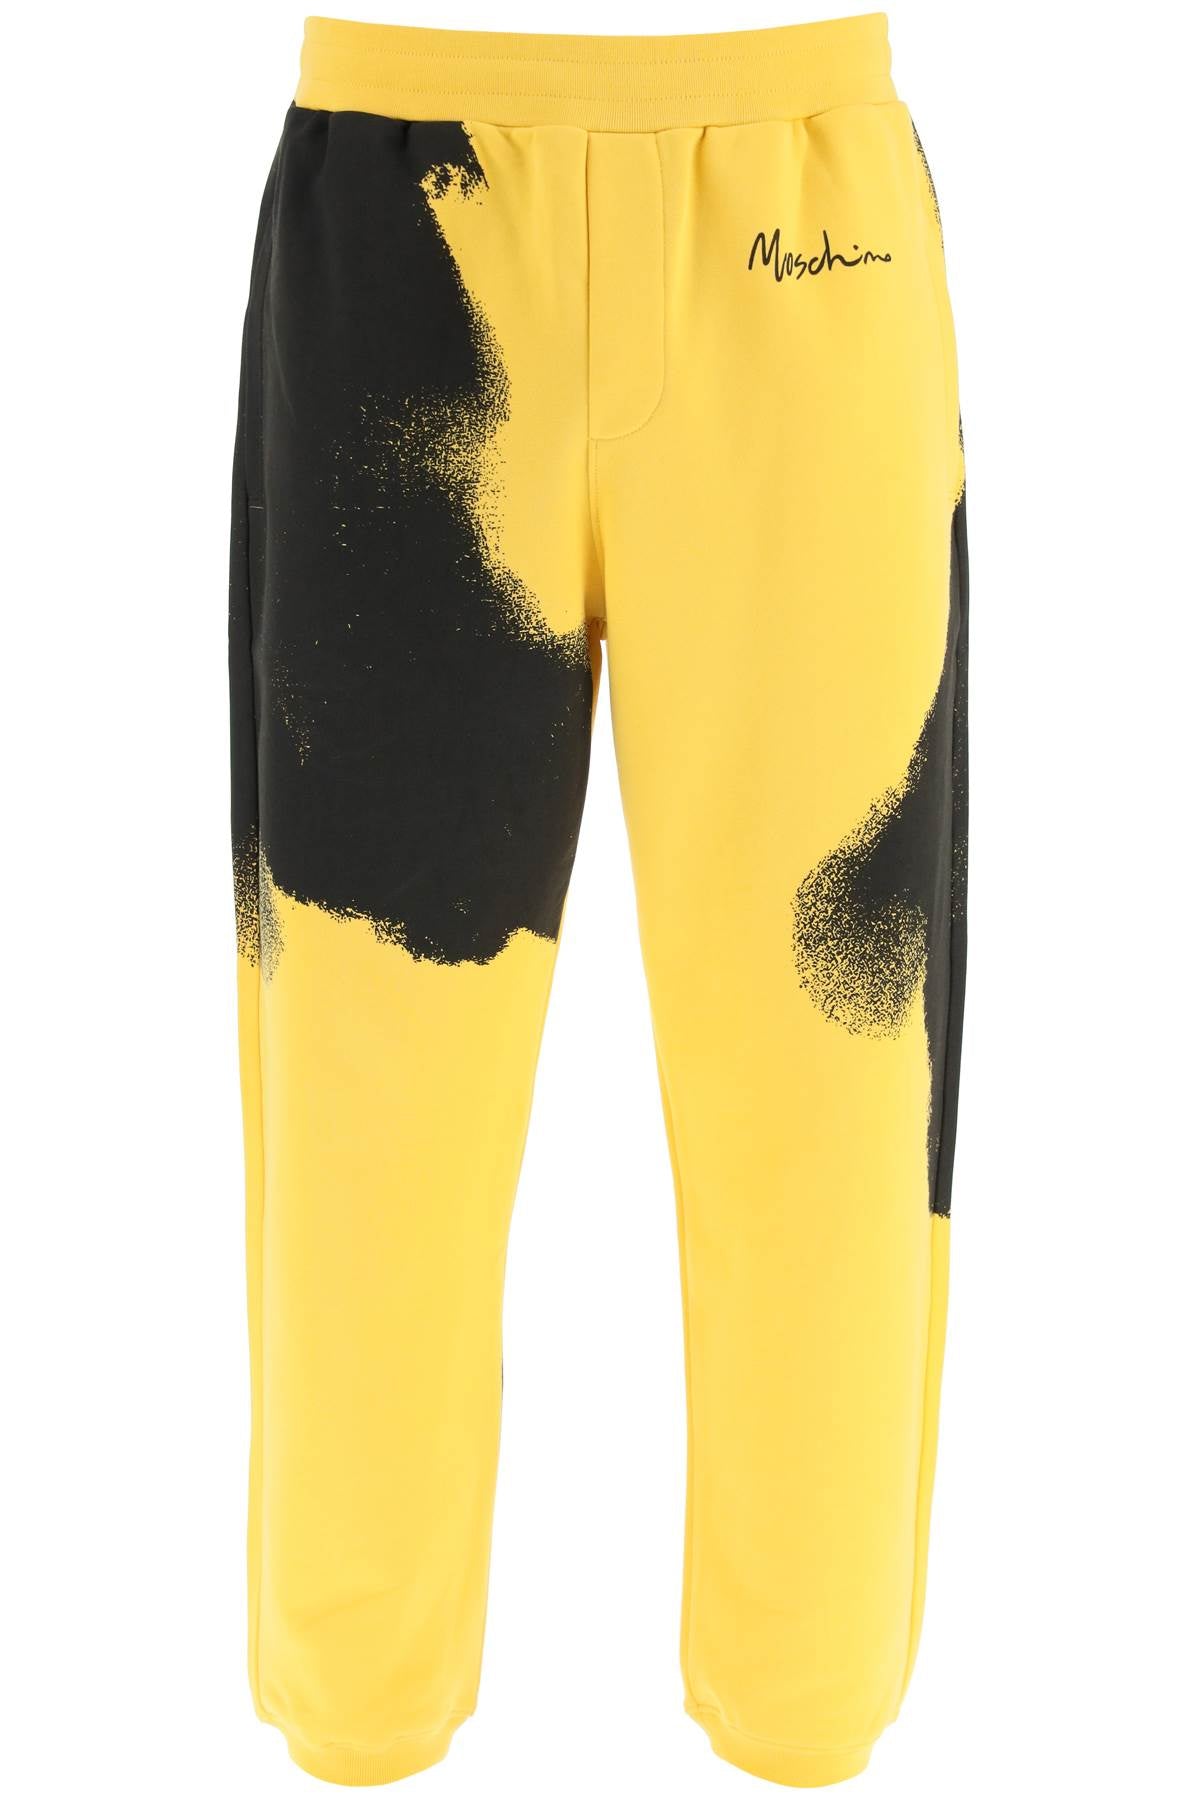 Moschino graphic print jogger pants with logo-0